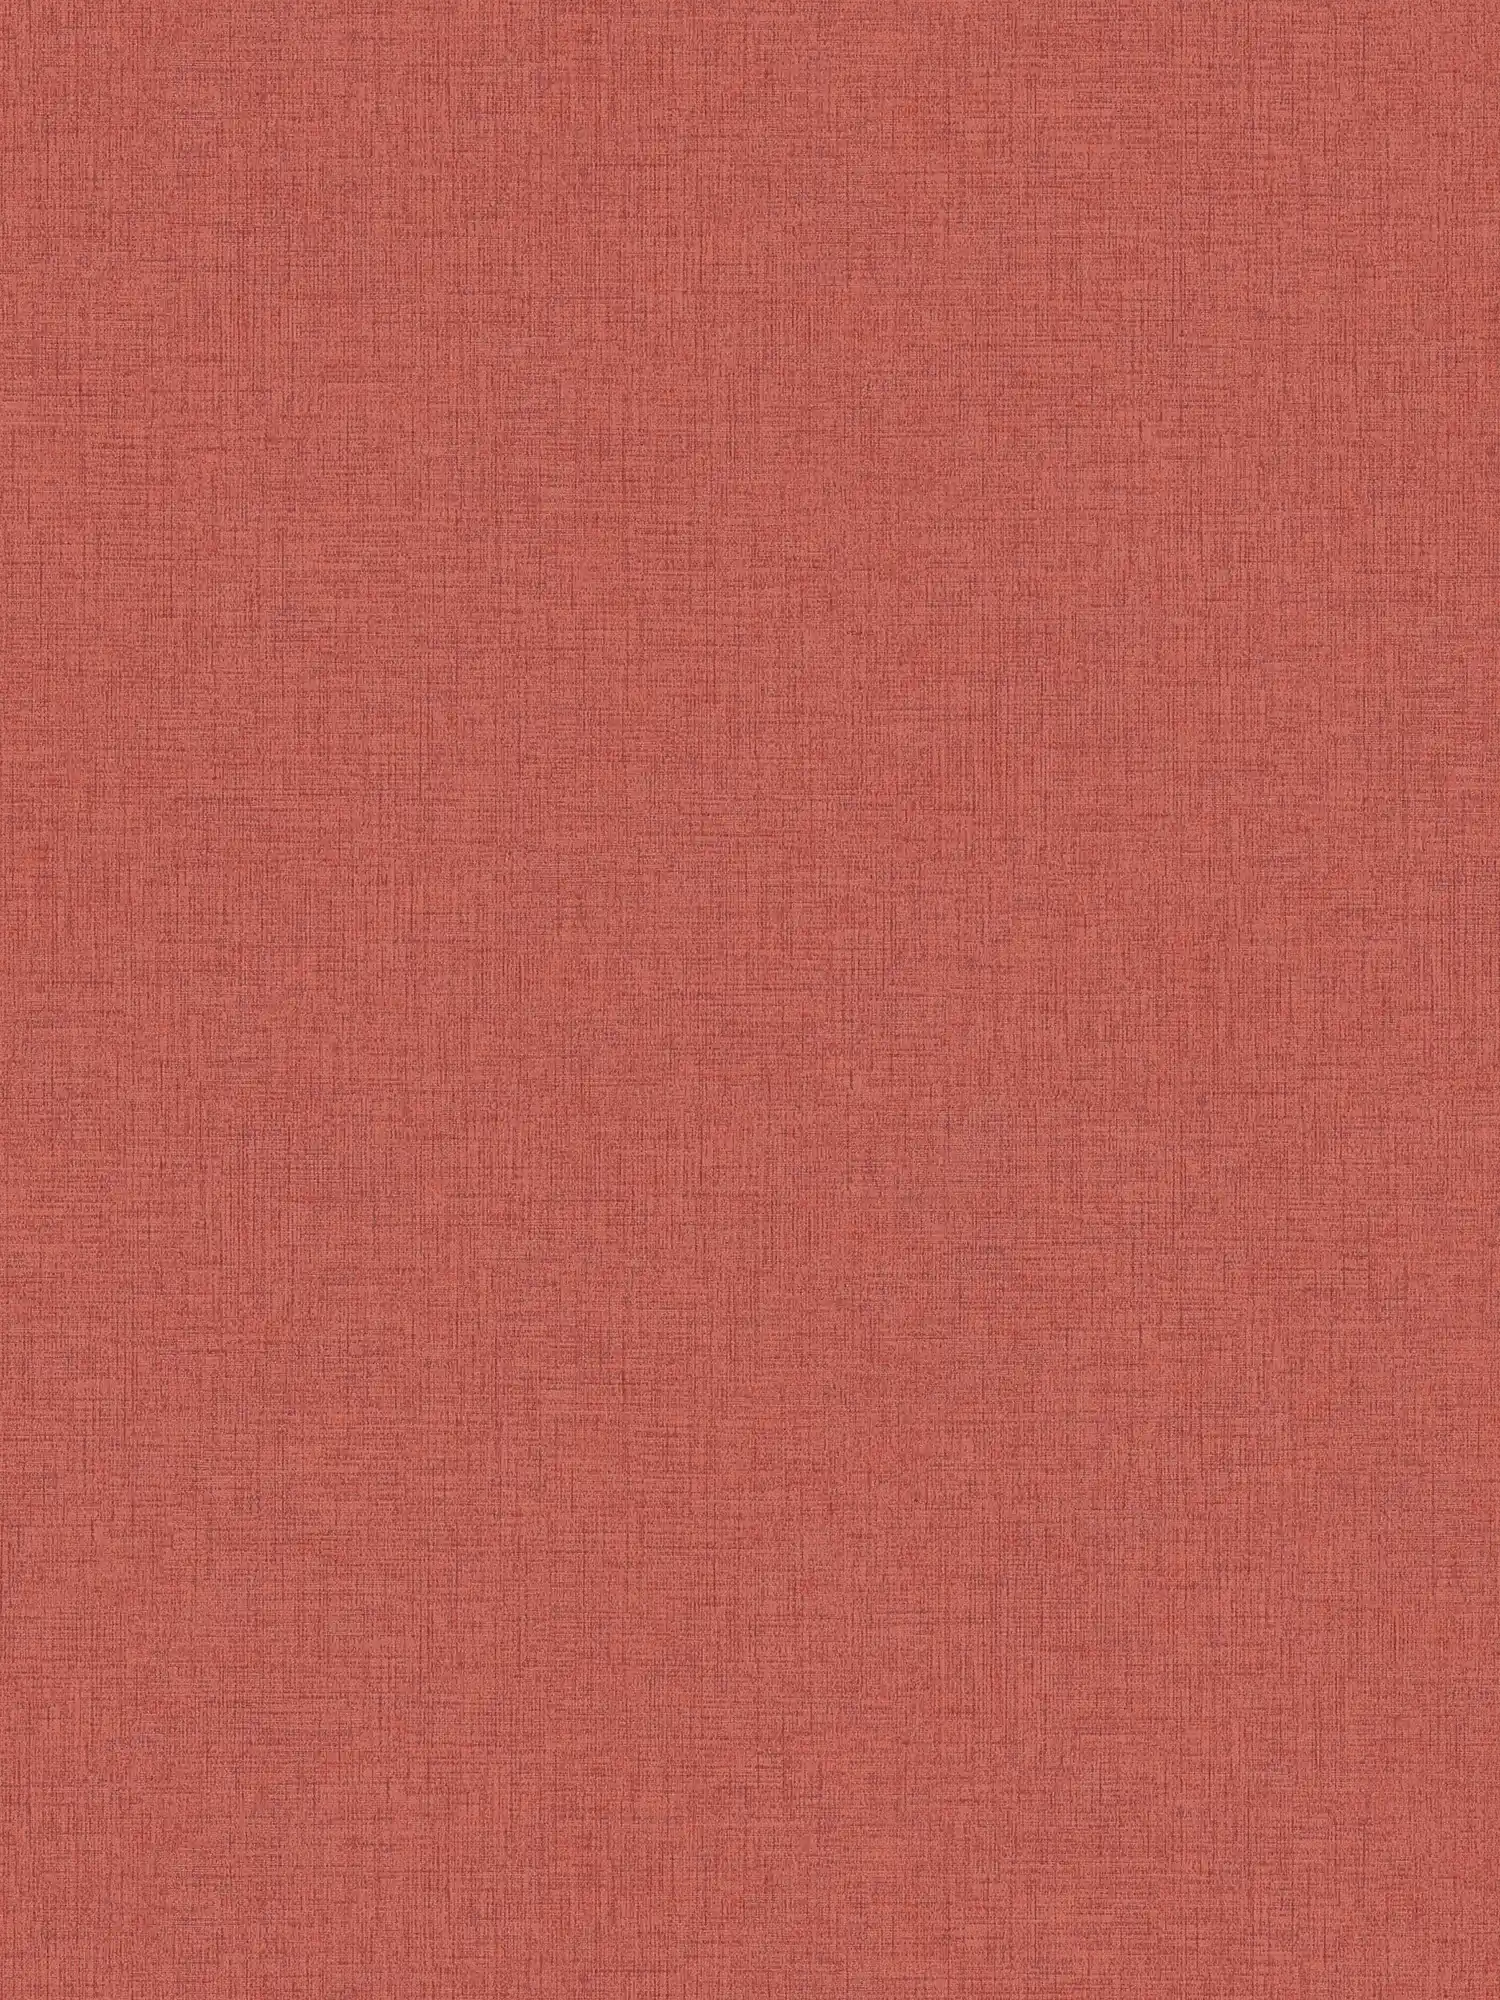 Non-woven wallpaper plain with textile look - red
